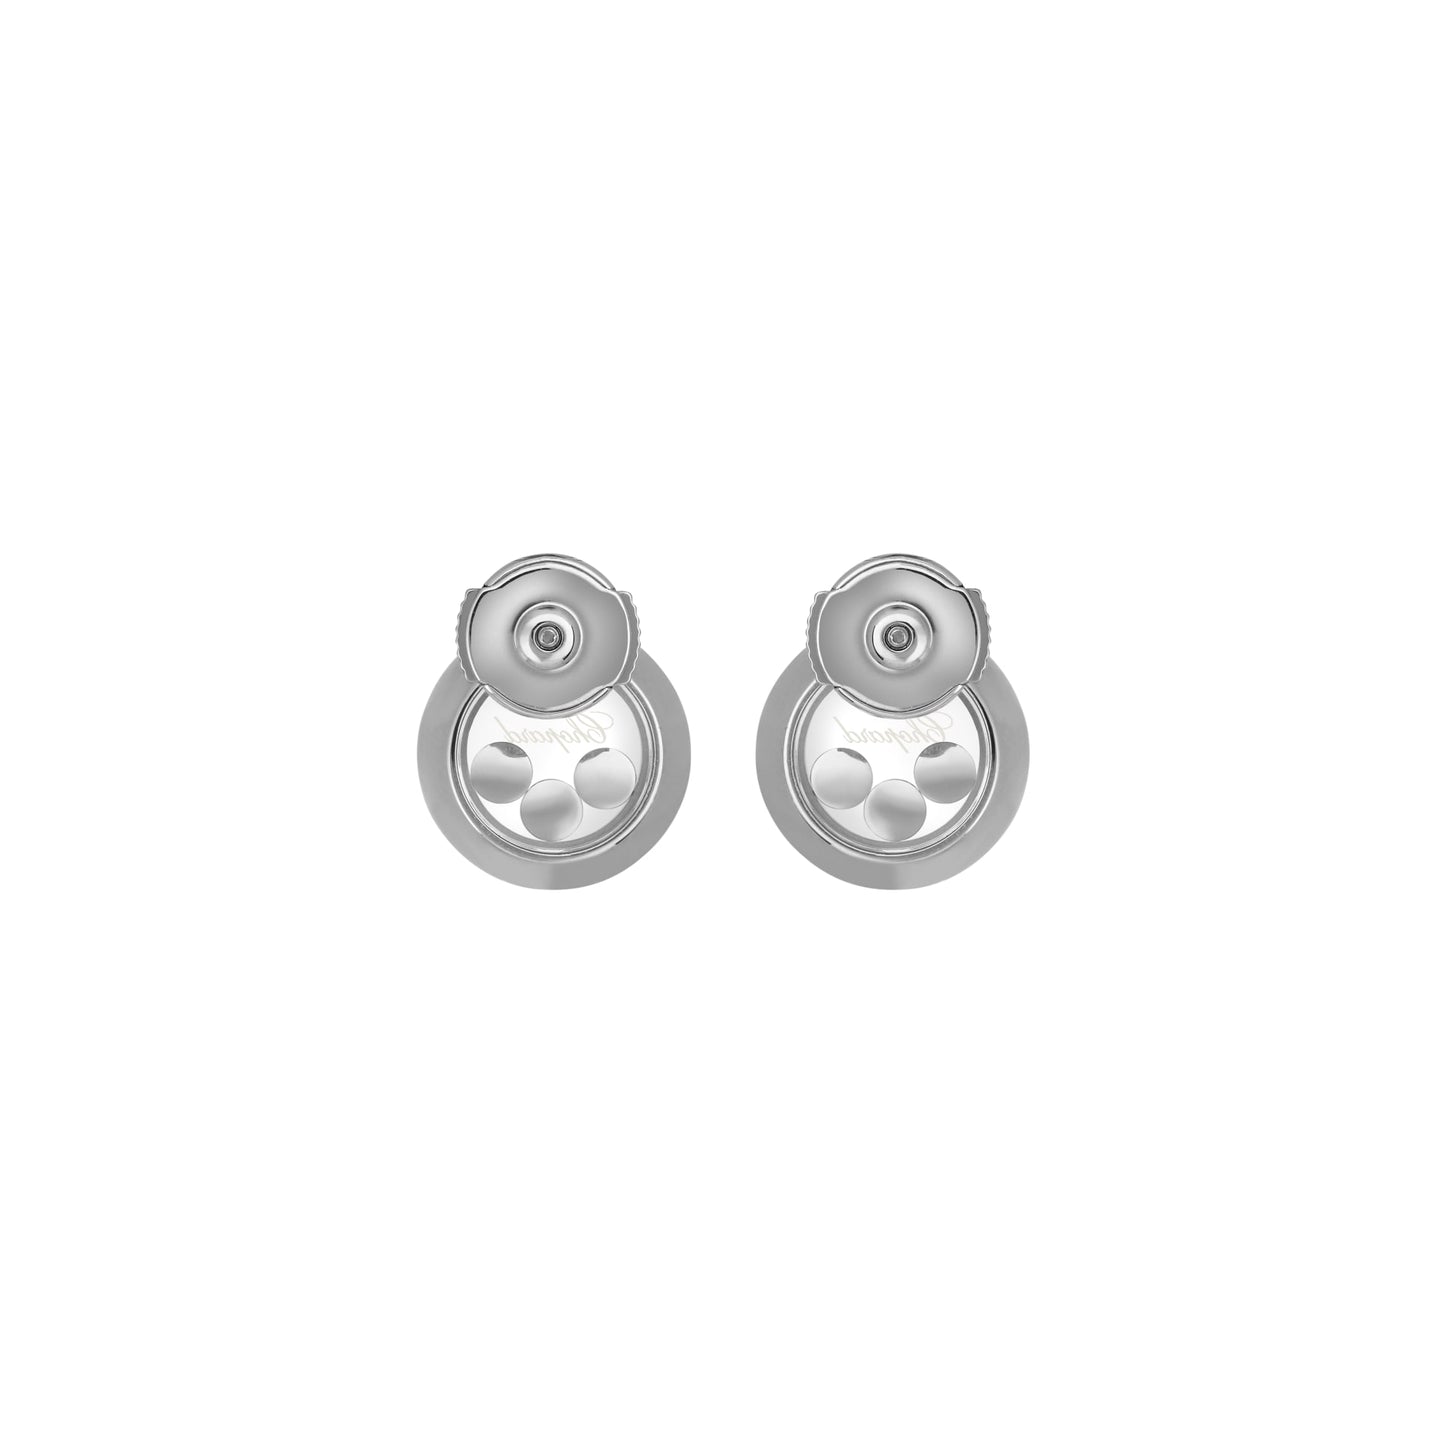 HAPPY DIAMONDS ICONS EARRINGS, ETHICAL WHITE GOLD, DIAMONDS 83A018-1001